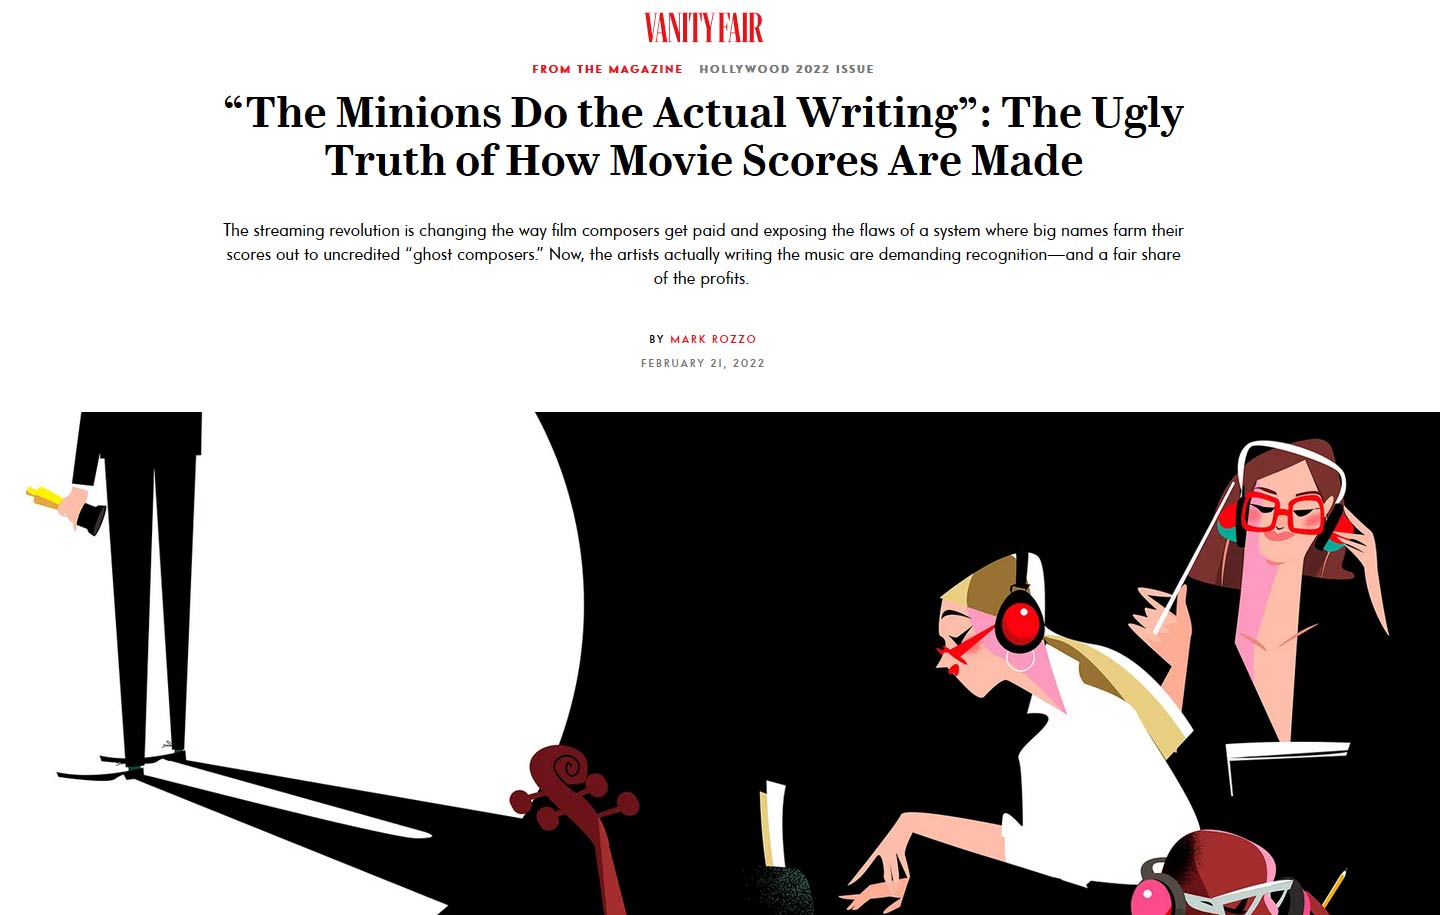 The Ugly Truth of How Film Scores are Made - Vanity Fair Article